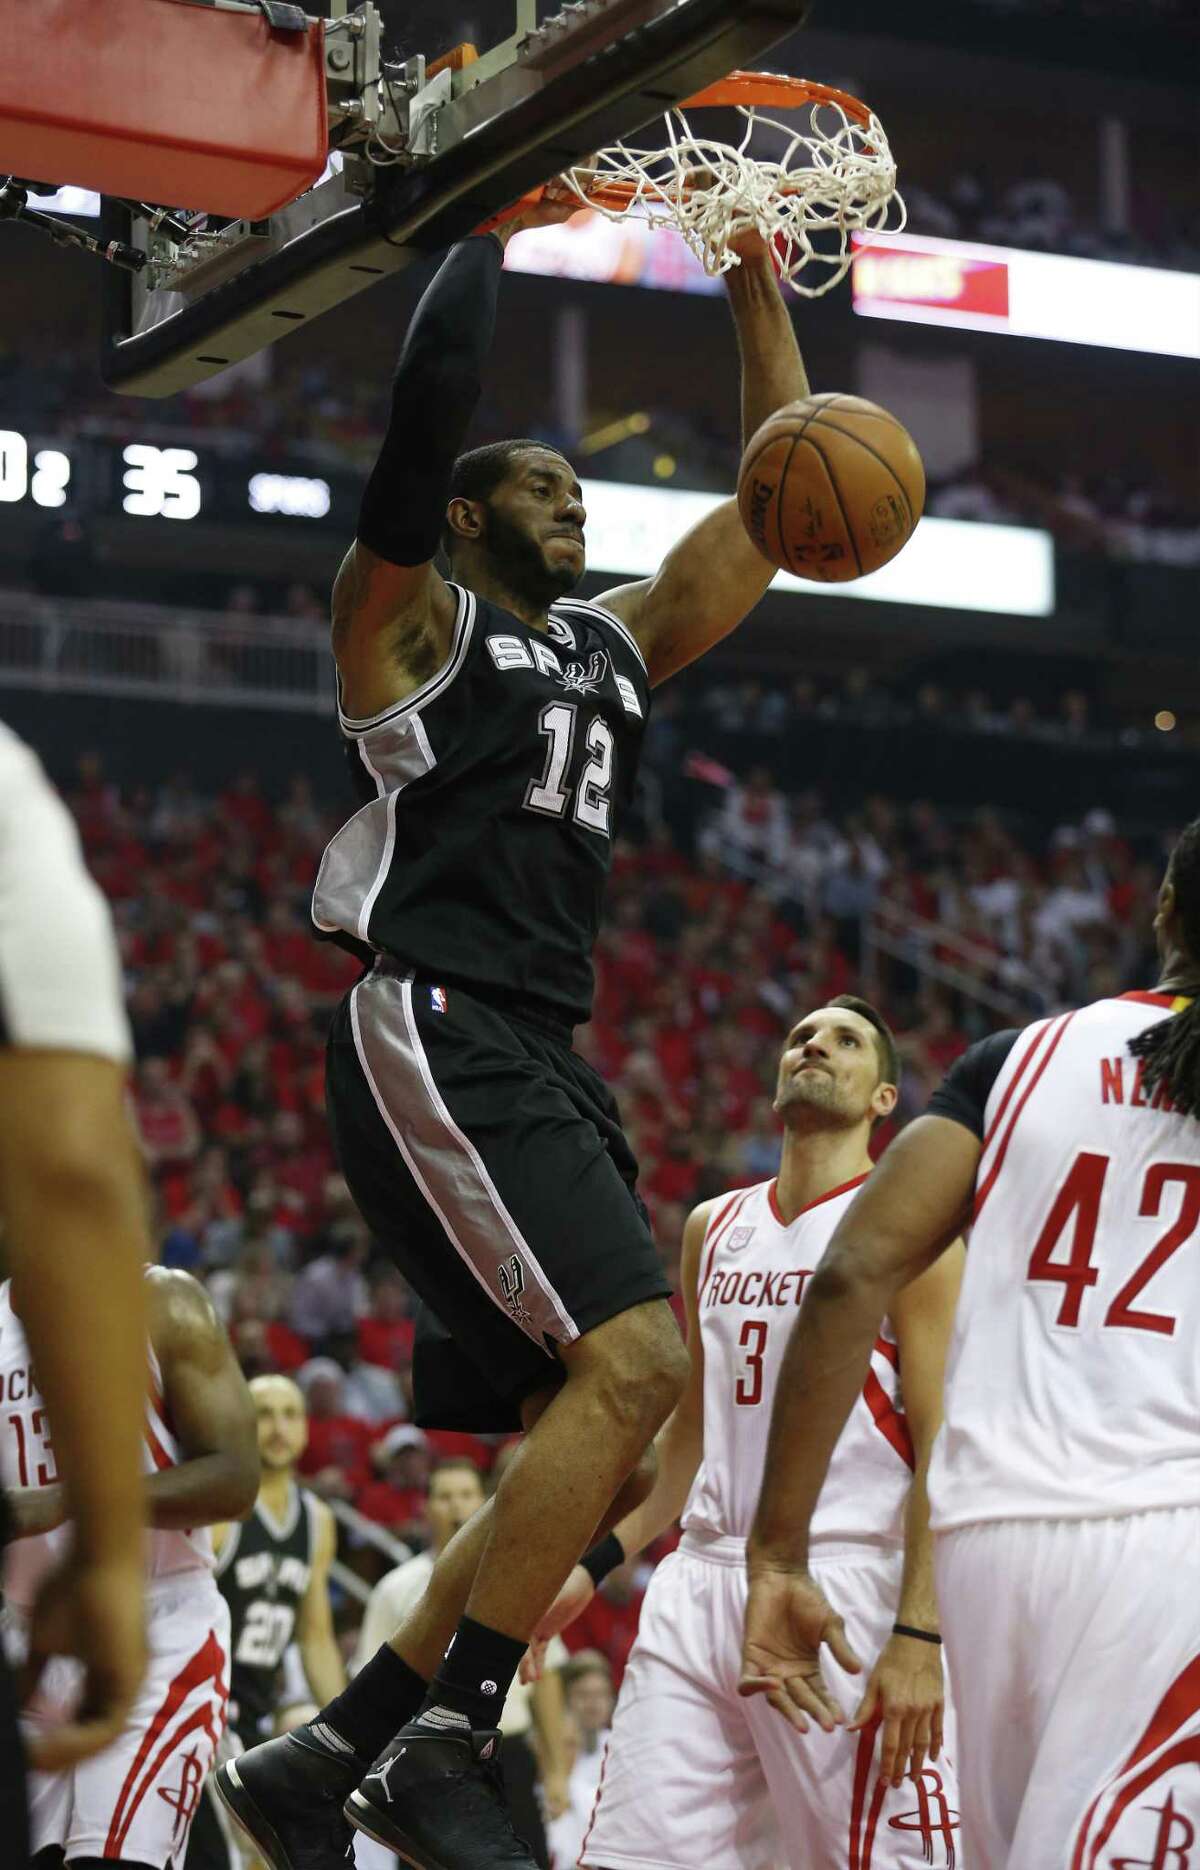 The Spurs’ LaMarcus Aldridge (12) dunks against the Rockets at the Toyota Center on Friday. Aldridge tied Kawhi Leonard with a team-high 26 points.